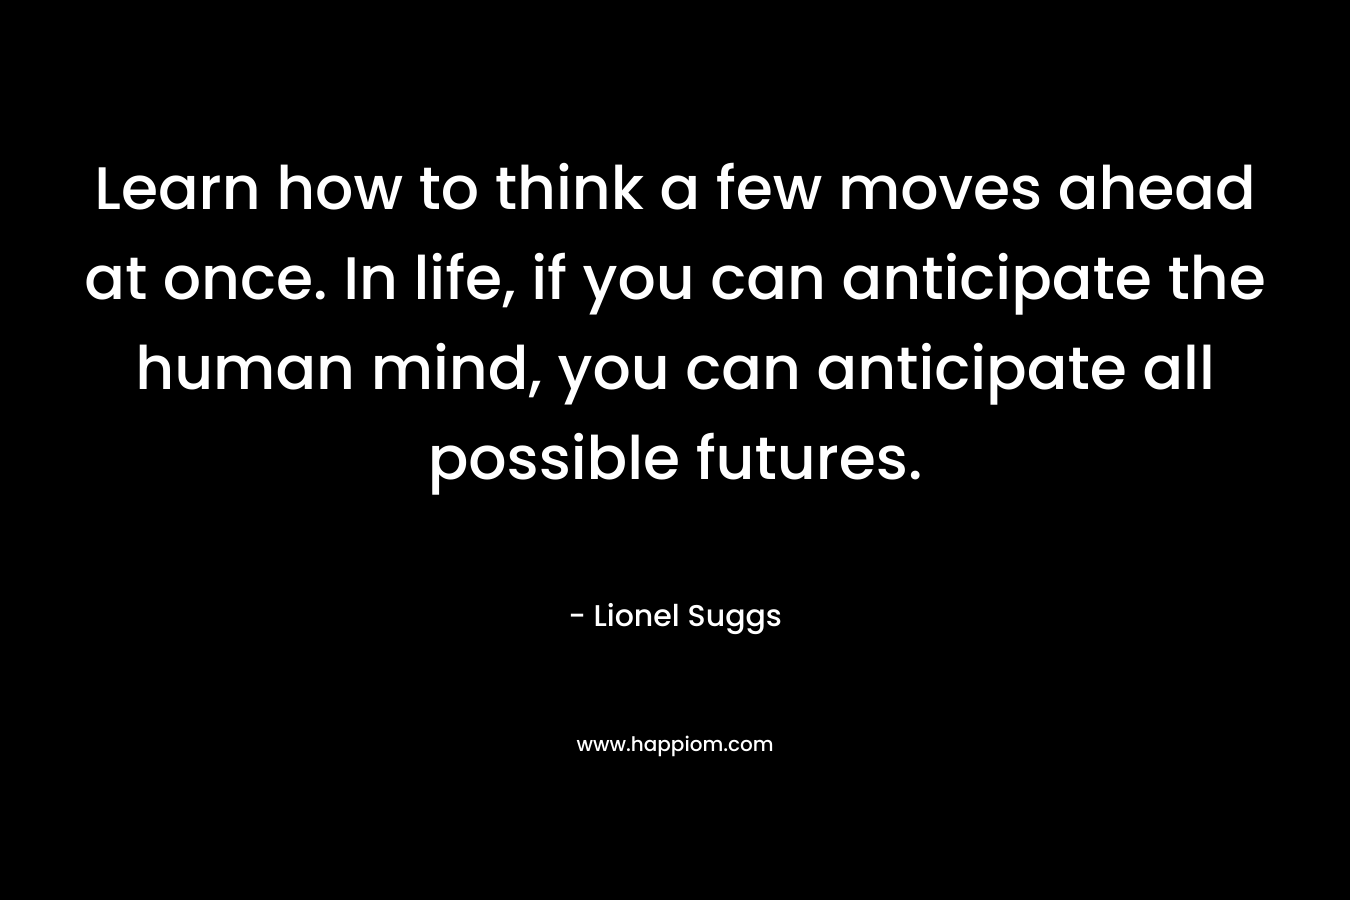 Learn how to think a few moves ahead at once. In life, if you can anticipate the human mind, you can anticipate all possible futures.